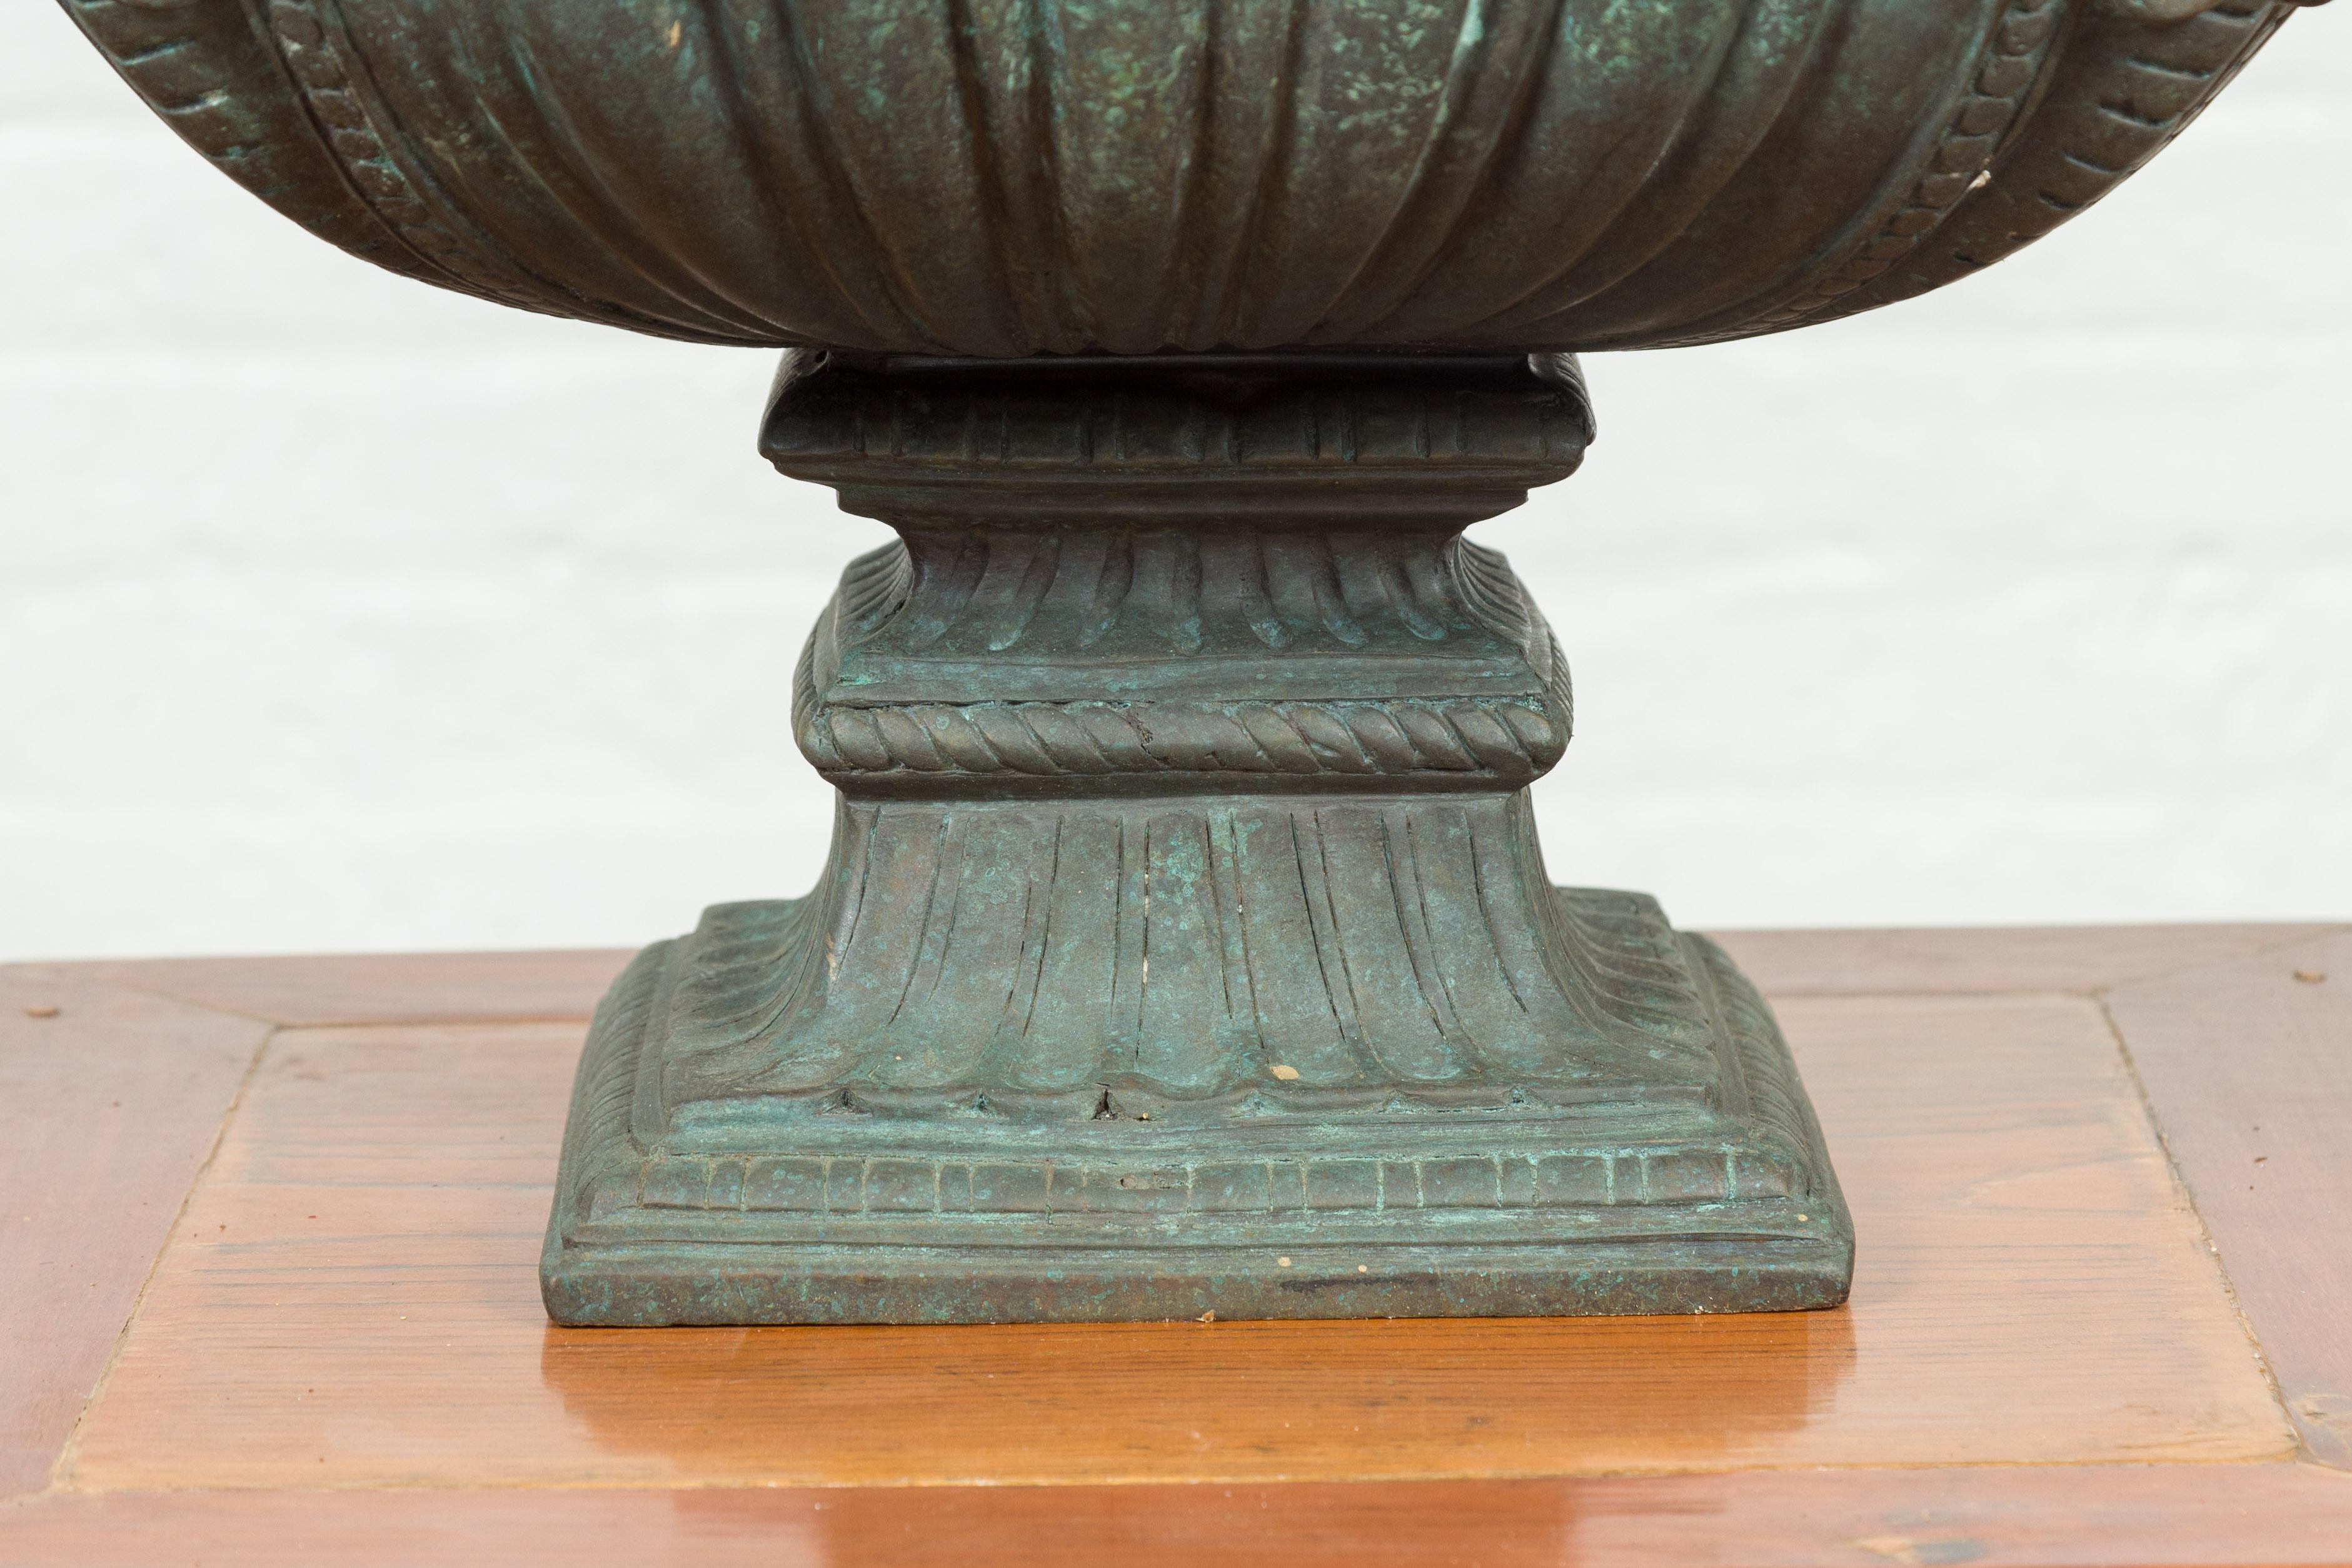 Contemporary Cast Bronze Planter with Figures, Gadroon Motifs and Verde Patina For Sale 4